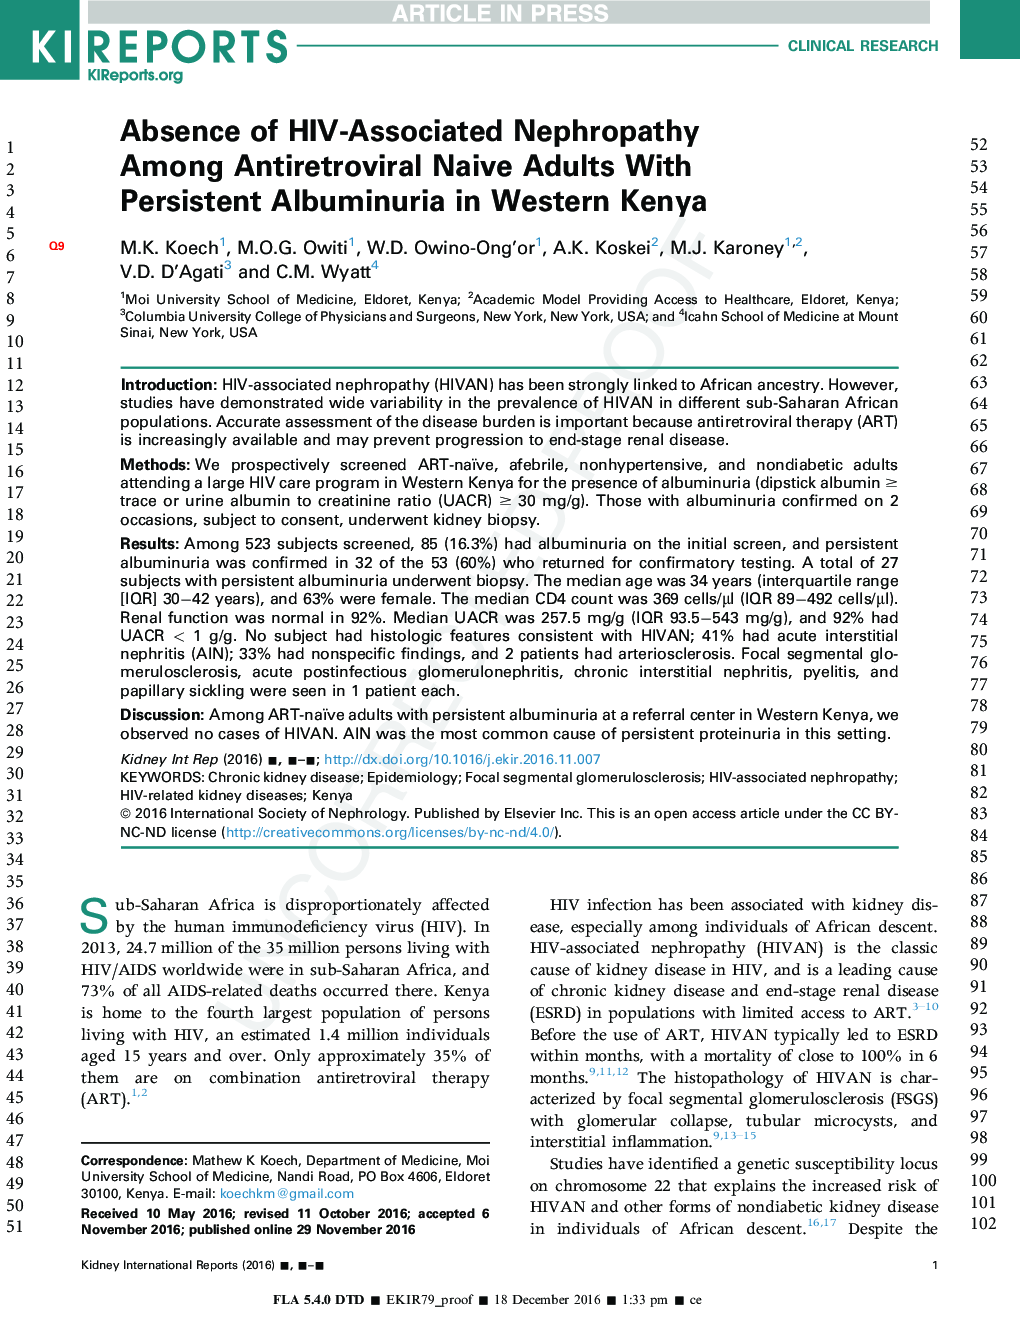 Absence of HIV-Associated Nephropathy Among Antiretroviral Naive Adults With Persistent Albuminuria in Western Kenya